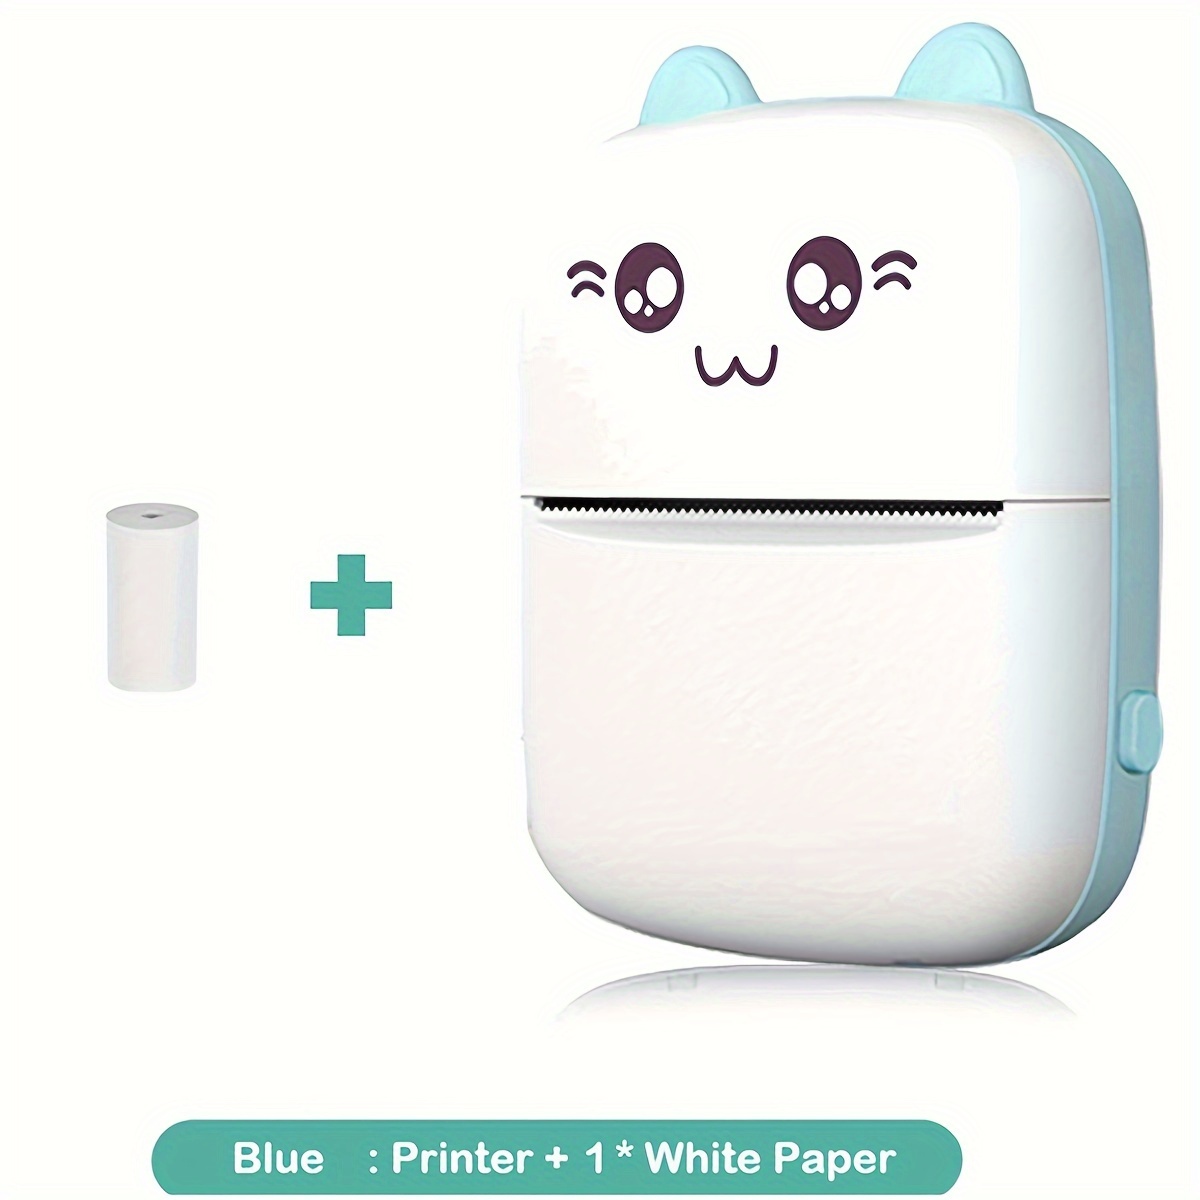 Portable Mini Printer Thermal One Roll of Printing Pape Blue